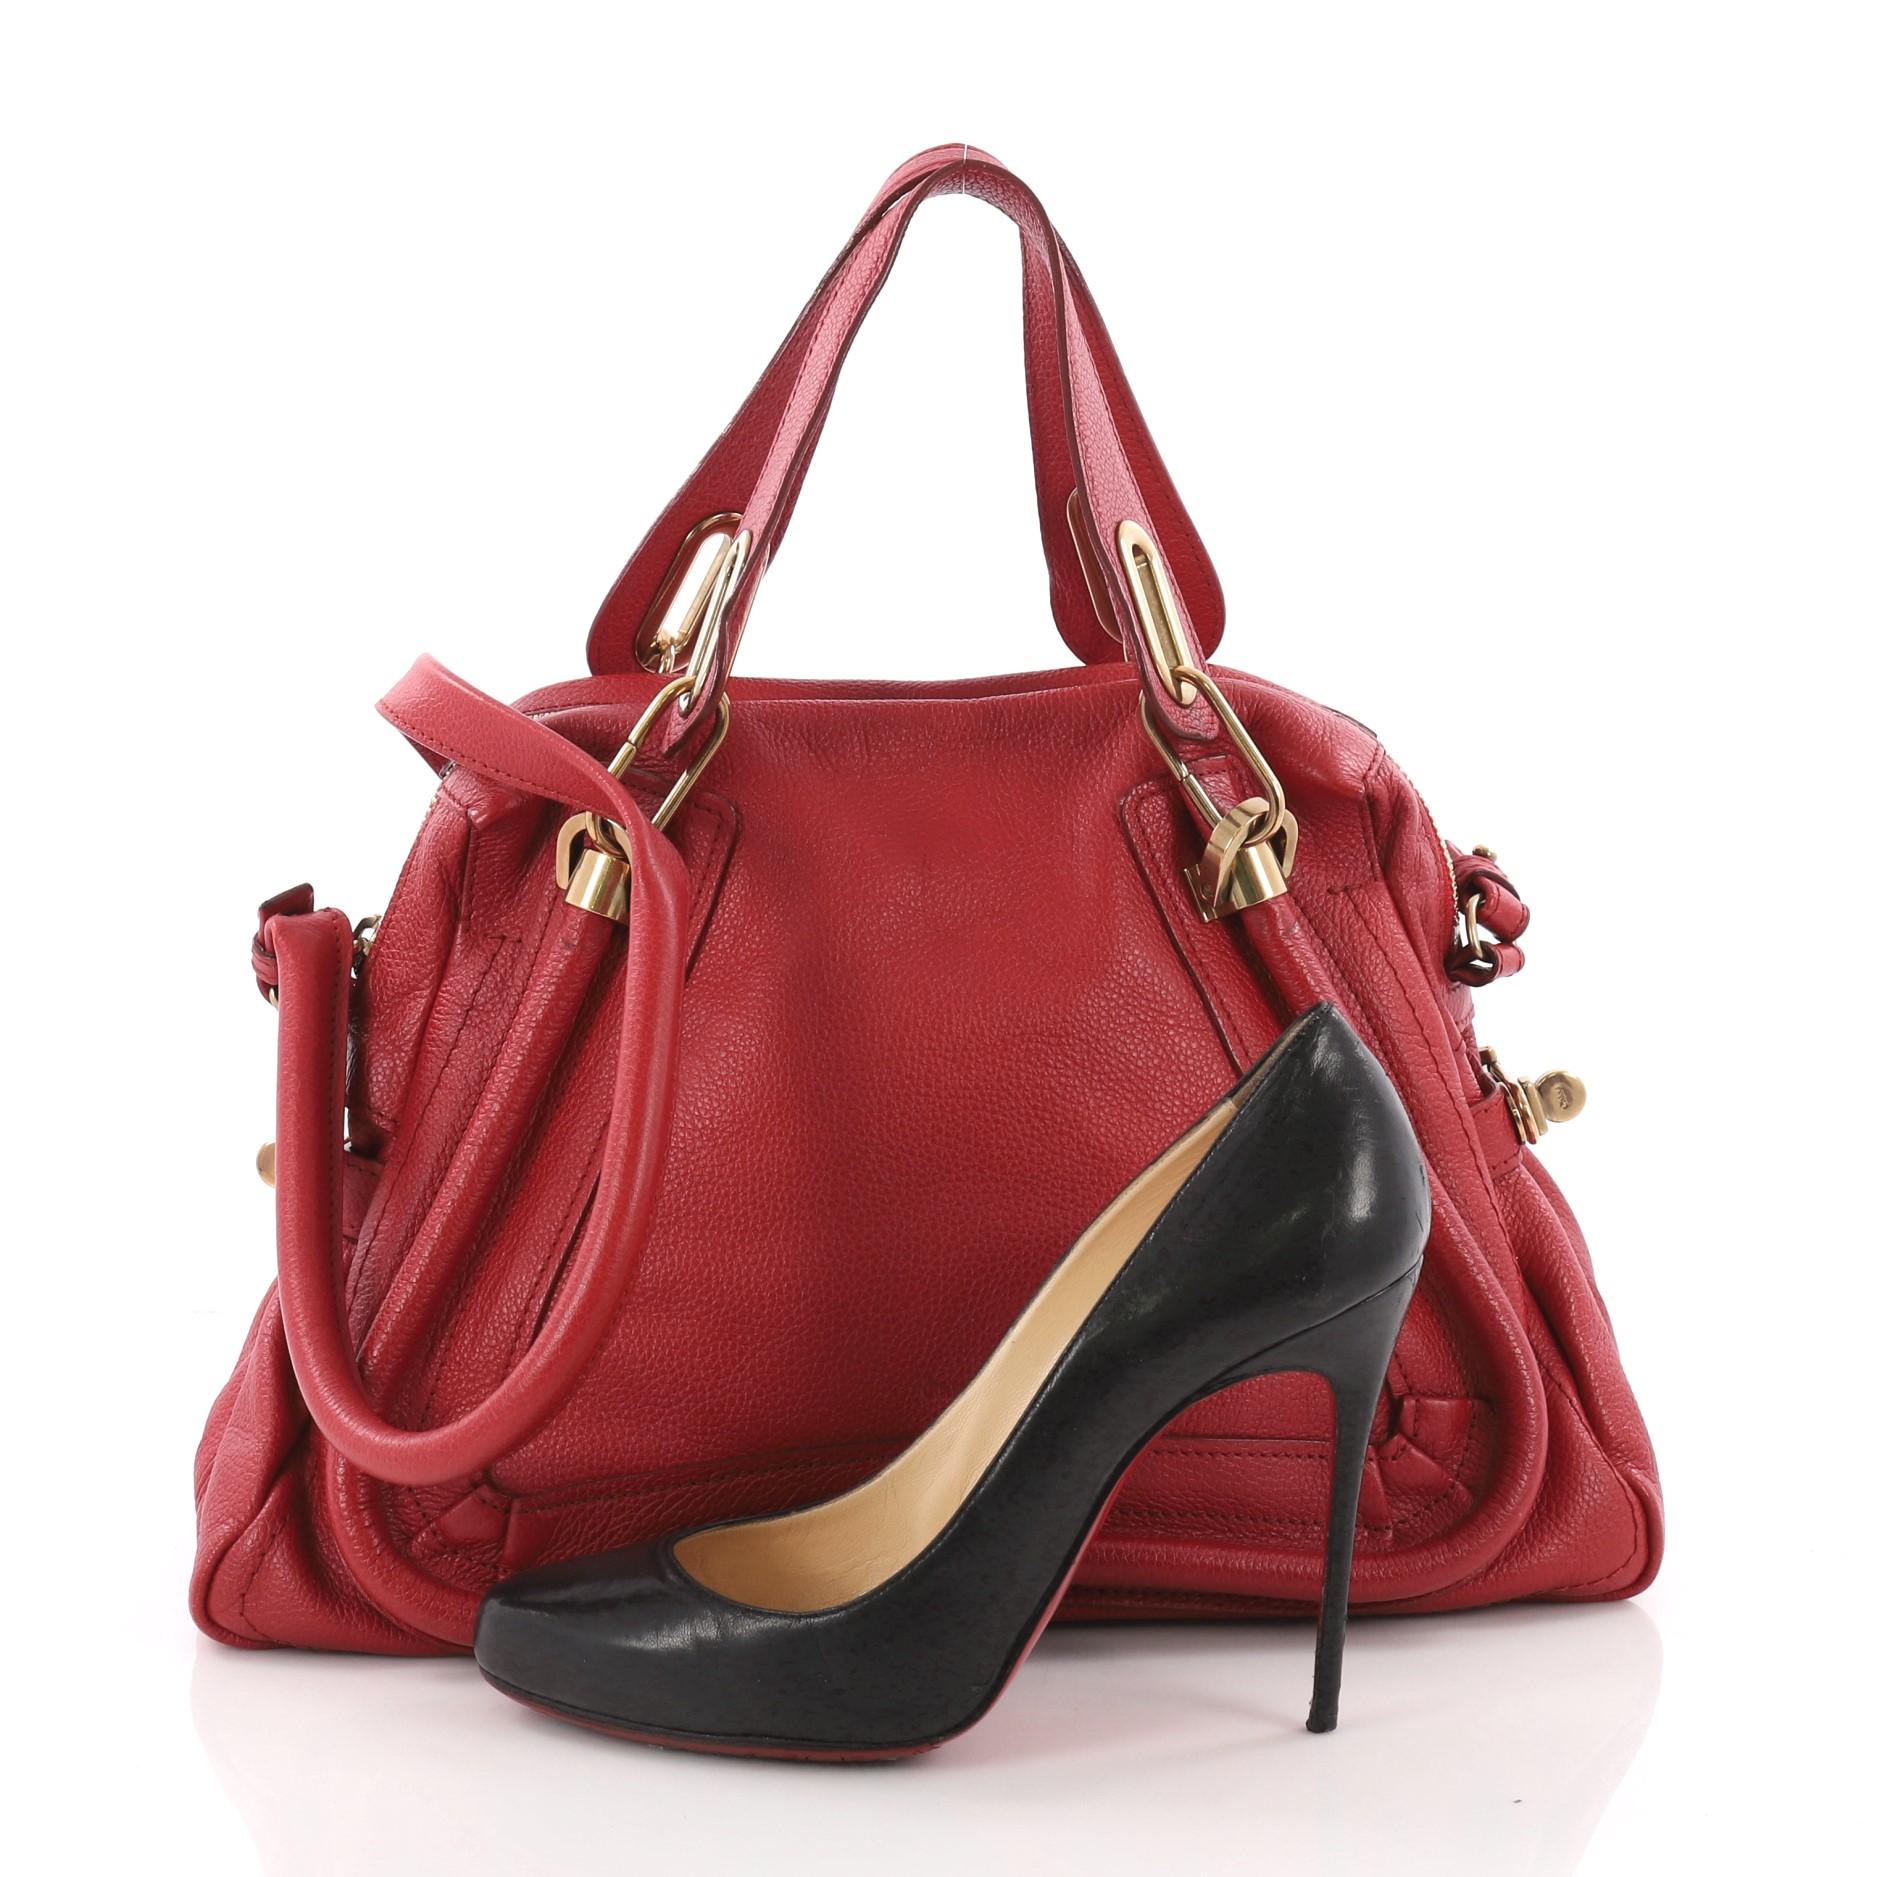 This authentic Chloe Paraty Top Handle Bag Leather Medium mixes style with functionality. Crafted from red leather, this versatile bag features dual flat handles, piped trim details, side twist locks, and gold-tone hardware accents. Its top zip